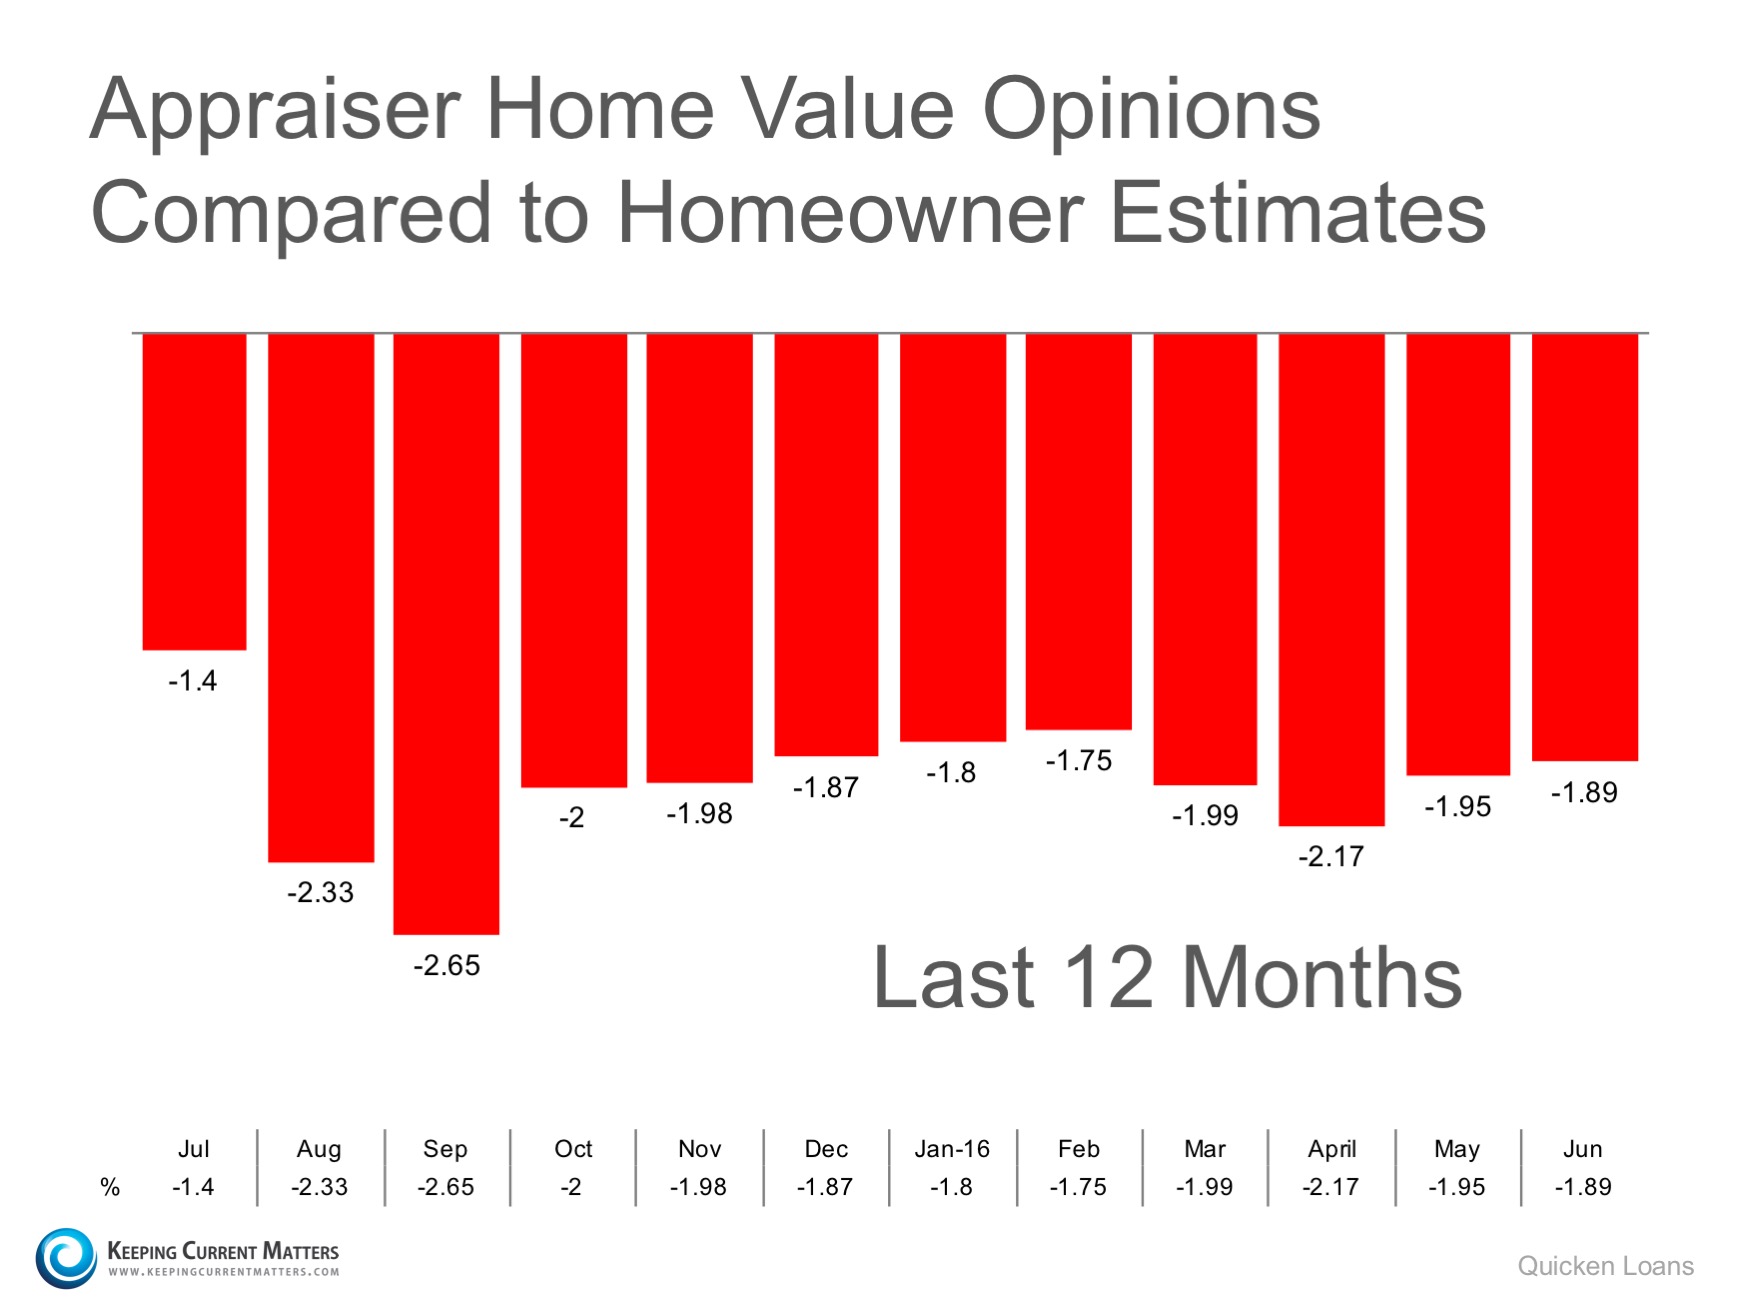 Gap Between Homeowner’s & Appraiser’s Opinions Narrows Slightly | Keeping Current Matters